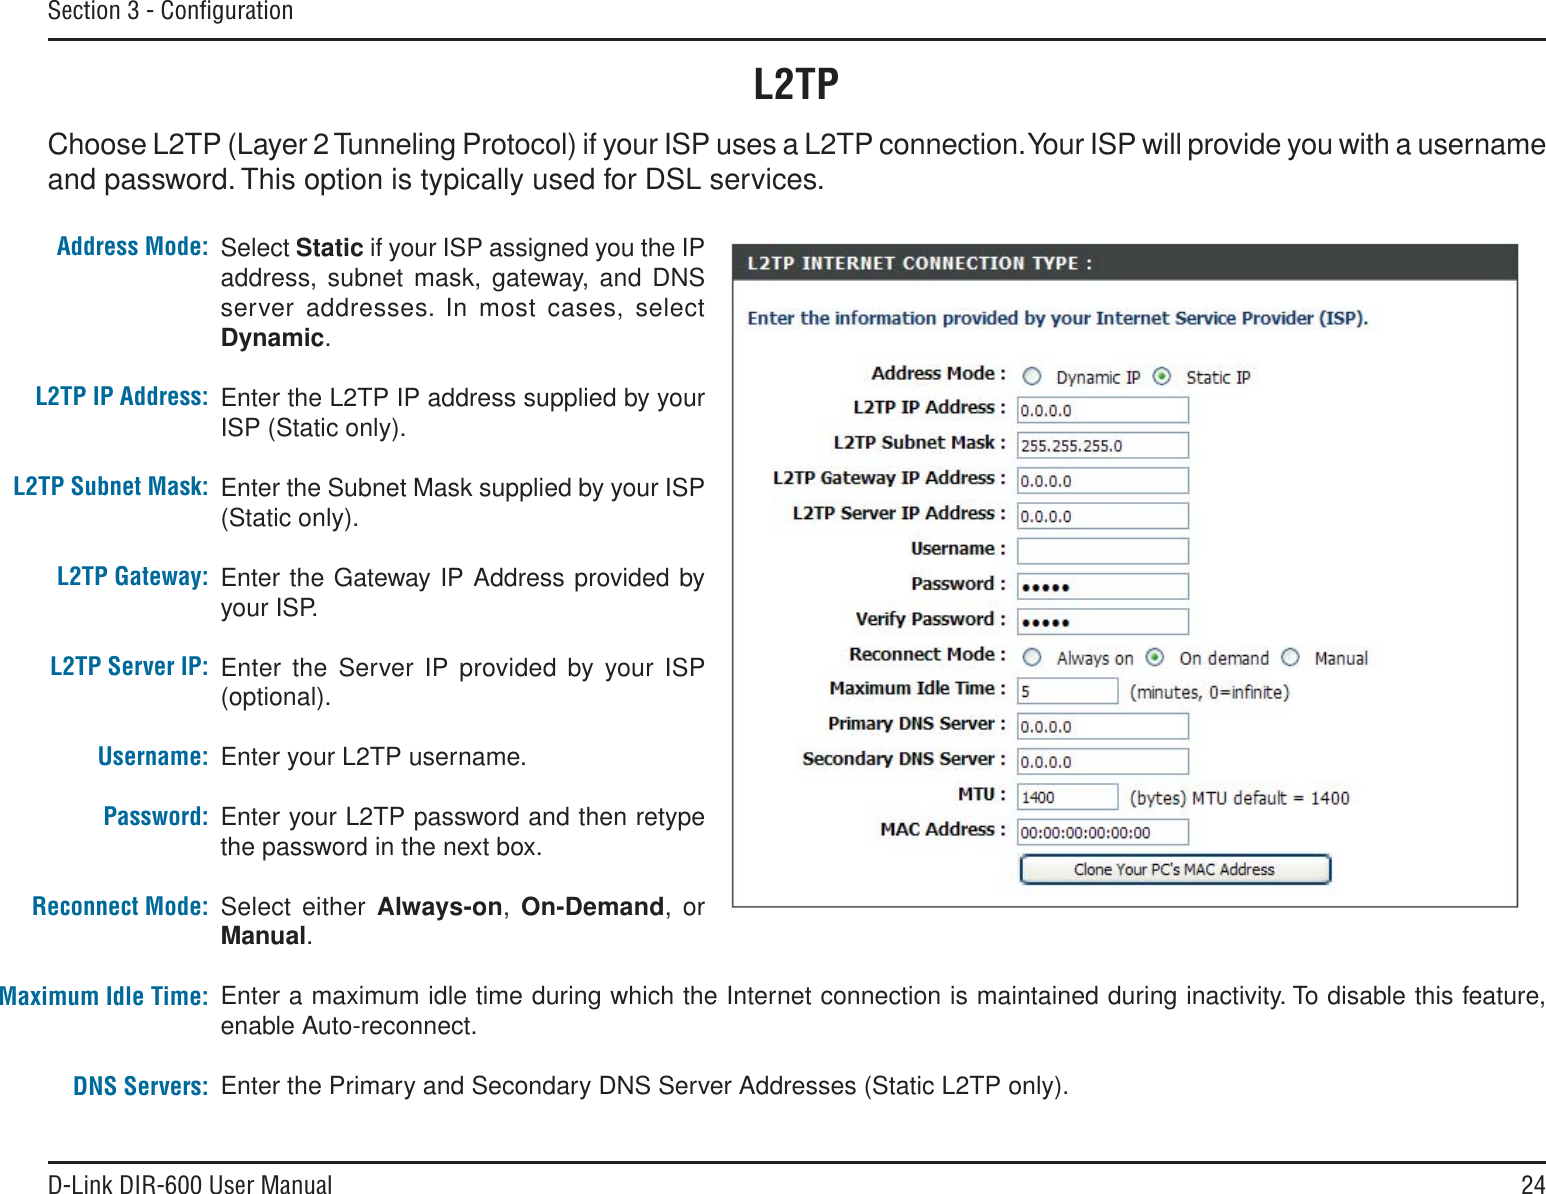 24D-Link DIR-600 User ManualSection 3 - ConﬁgurationSelect Static if your ISP assigned you the IP address, subnet mask, gateway, and DNS server addresses. In most cases, select Dynamic.Enter the L2TP IP address supplied by your ISP (Static only).Enter the Subnet Mask supplied by your ISP (Static only).Enter the Gateway IP Address provided by your ISP.Enter the Server IP provided by your ISP (optional).Enter your L2TP username.Enter your L2TP password and then retype the password in the next box.Select either Always-on, On-Demand, or Manual.Enter a maximum idle time during which the Internet connection is maintained during inactivity. To disable this feature, enable Auto-reconnect.Enter the Primary and Secondary DNS Server Addresses (Static L2TP only).Address Mode:L2TP IP Address:L2TP Subnet Mask:L2TP Gateway:L2TP Server IP:Username:Password:Reconnect Mode:Maximum Idle Time:DNS Servers:L2TPChoose L2TP (Layer 2 Tunneling Protocol) if your ISP uses a L2TP connection. Your ISP will provide you with a username and password. This option is typically used for DSL services. 